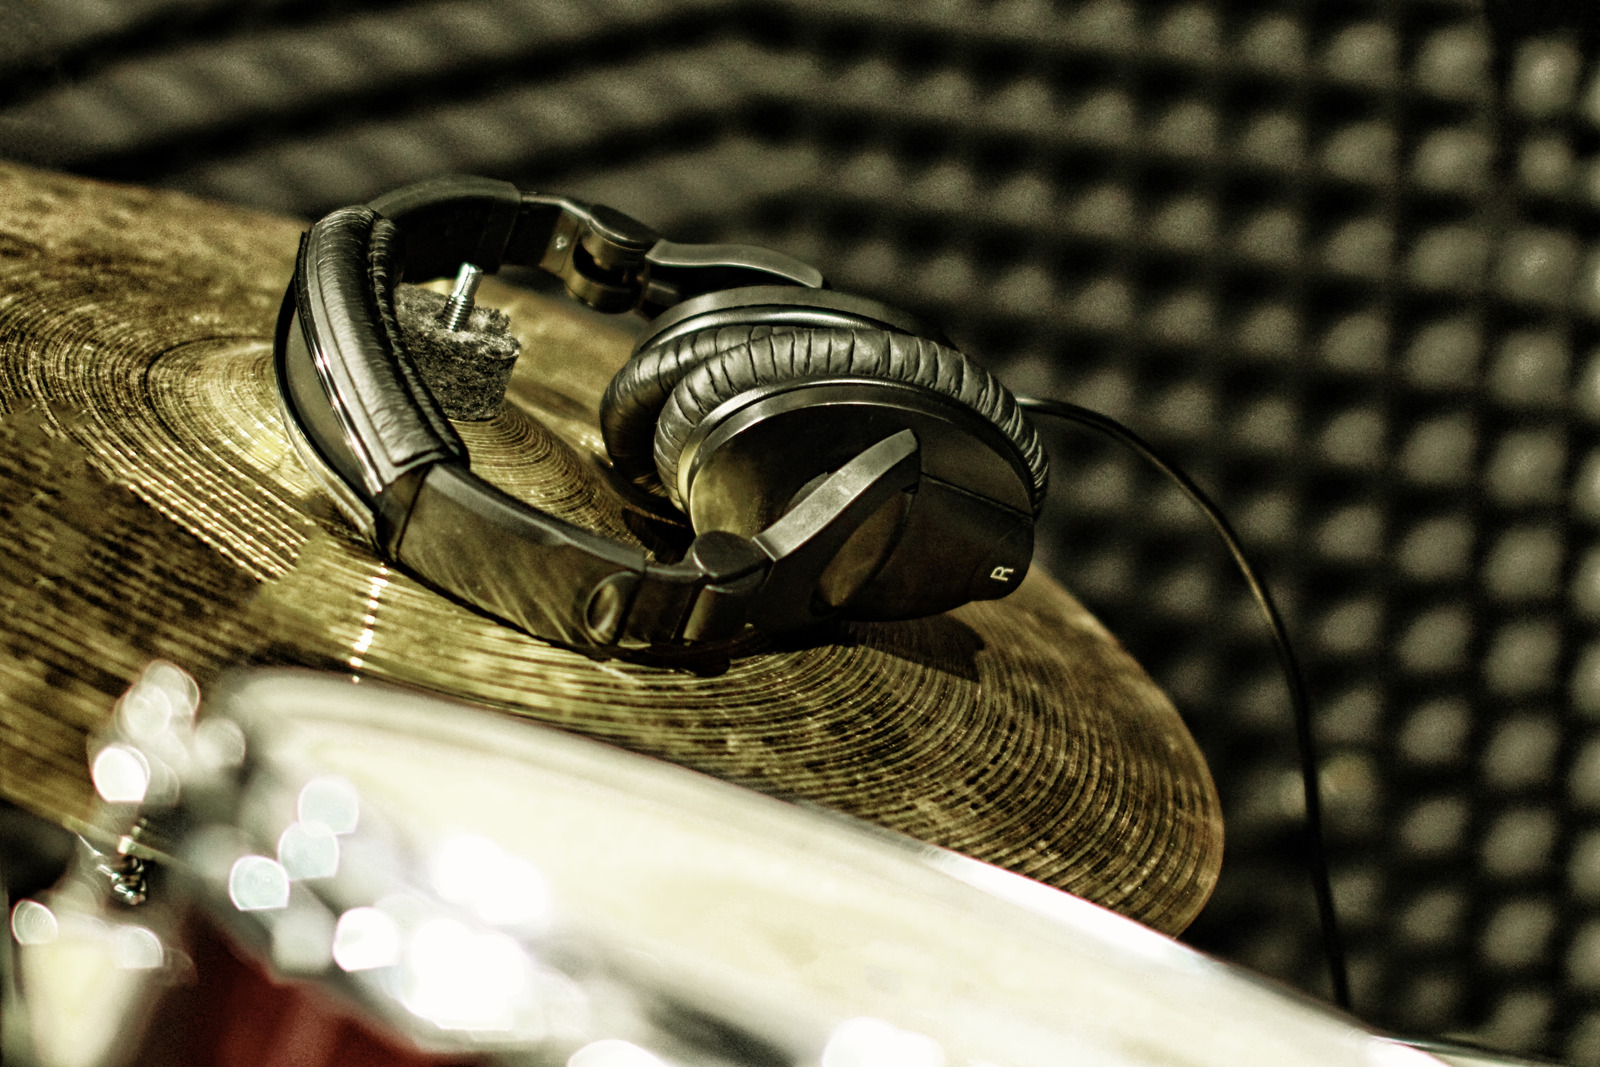 Gold plates and headphones from the drum set in the recording Studio. Professional drummers play recording